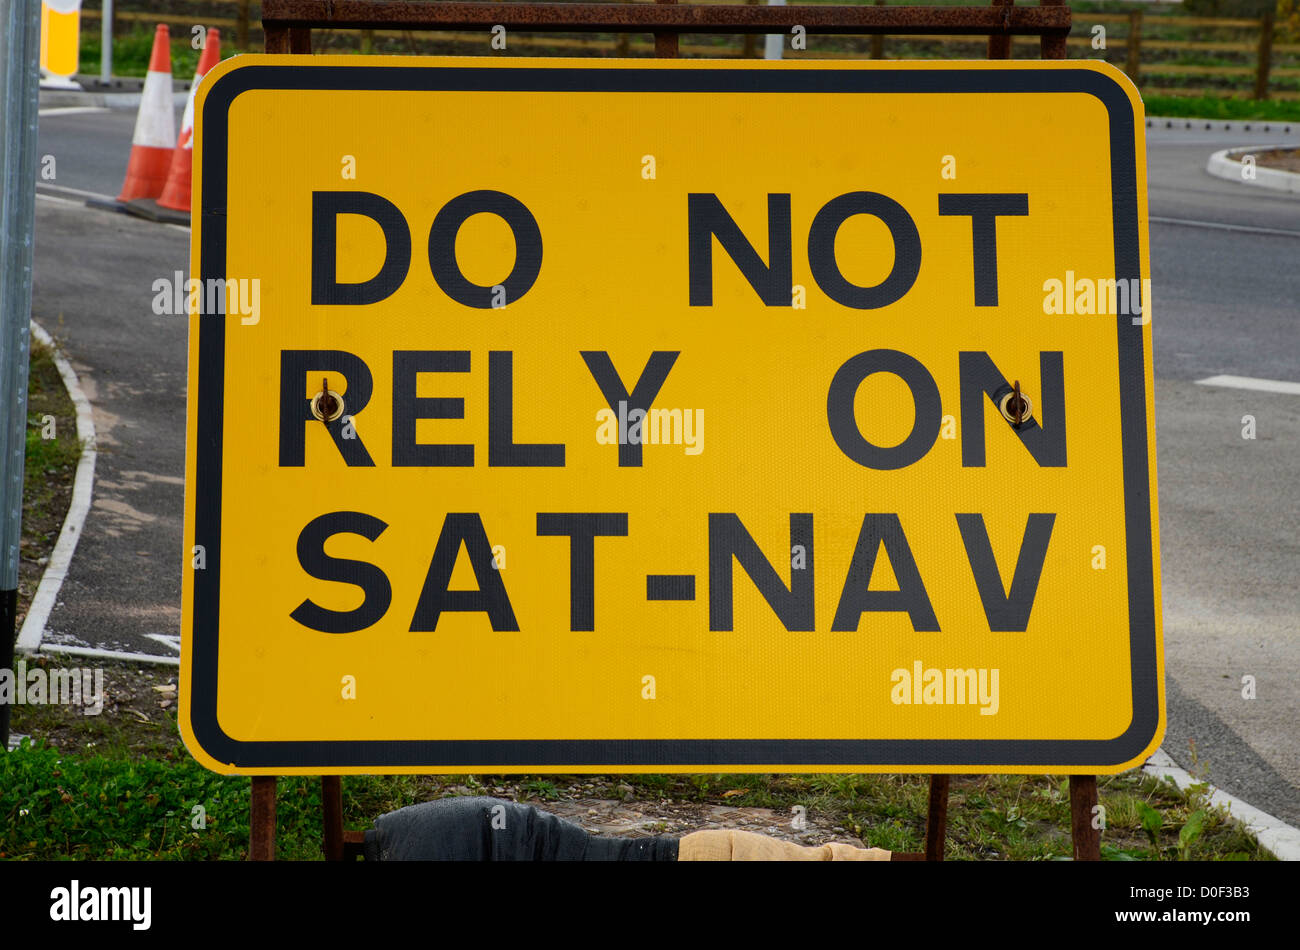 A road sign advising not to rely on sat nav devices Stock Photo